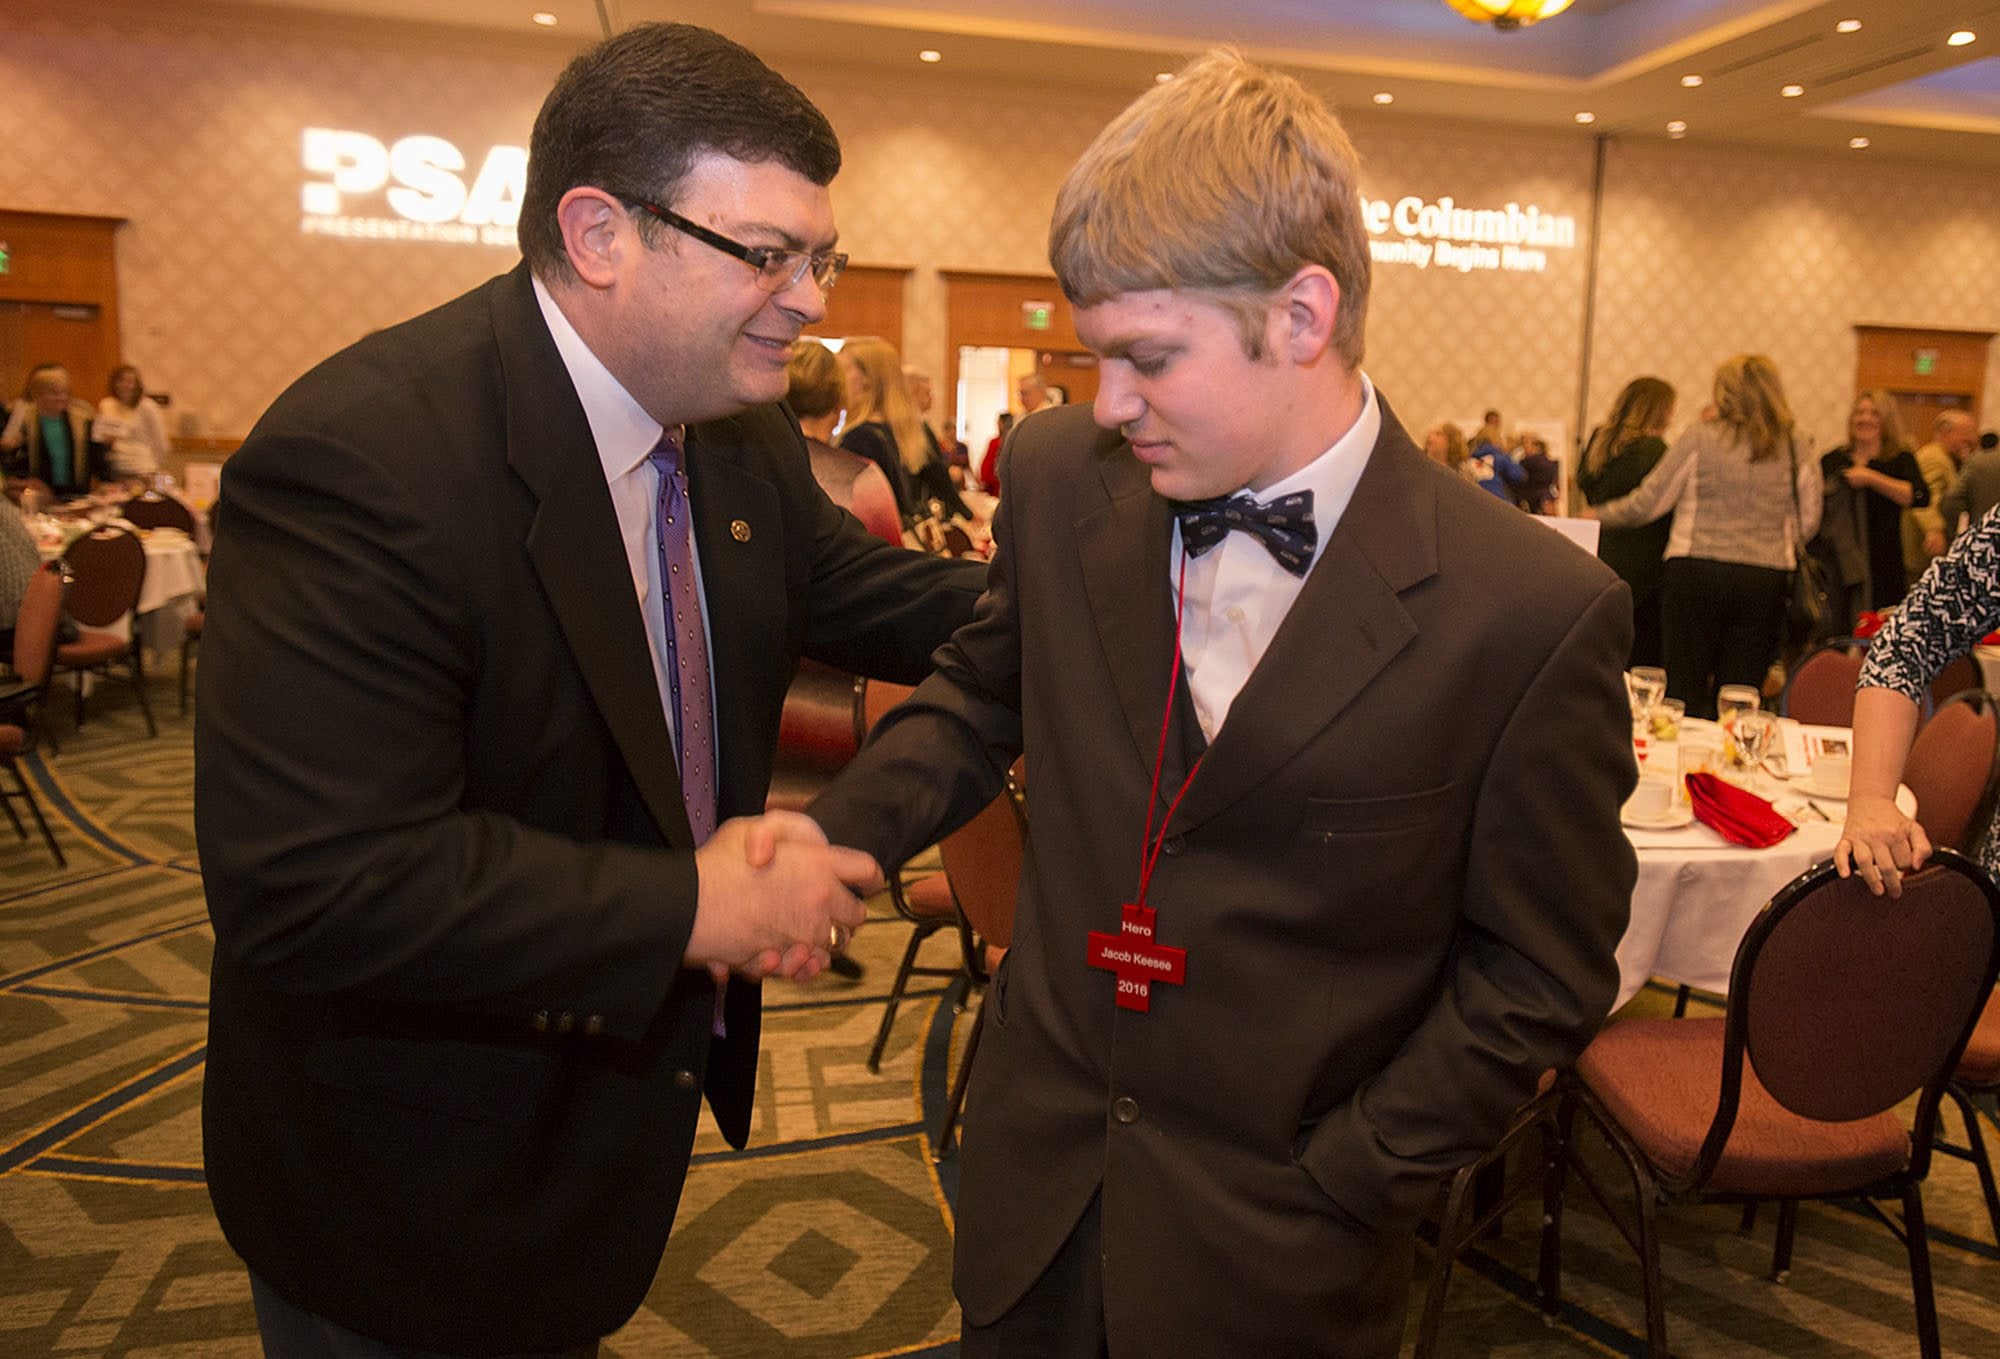 Dan Clark, senior vice president for Banner Bank, left, congratulates Jacob Keesee after he received the emergency response hero award at the 19th annual Real Heroes Breakfast on Friday morning at the Vancouver Hilton.